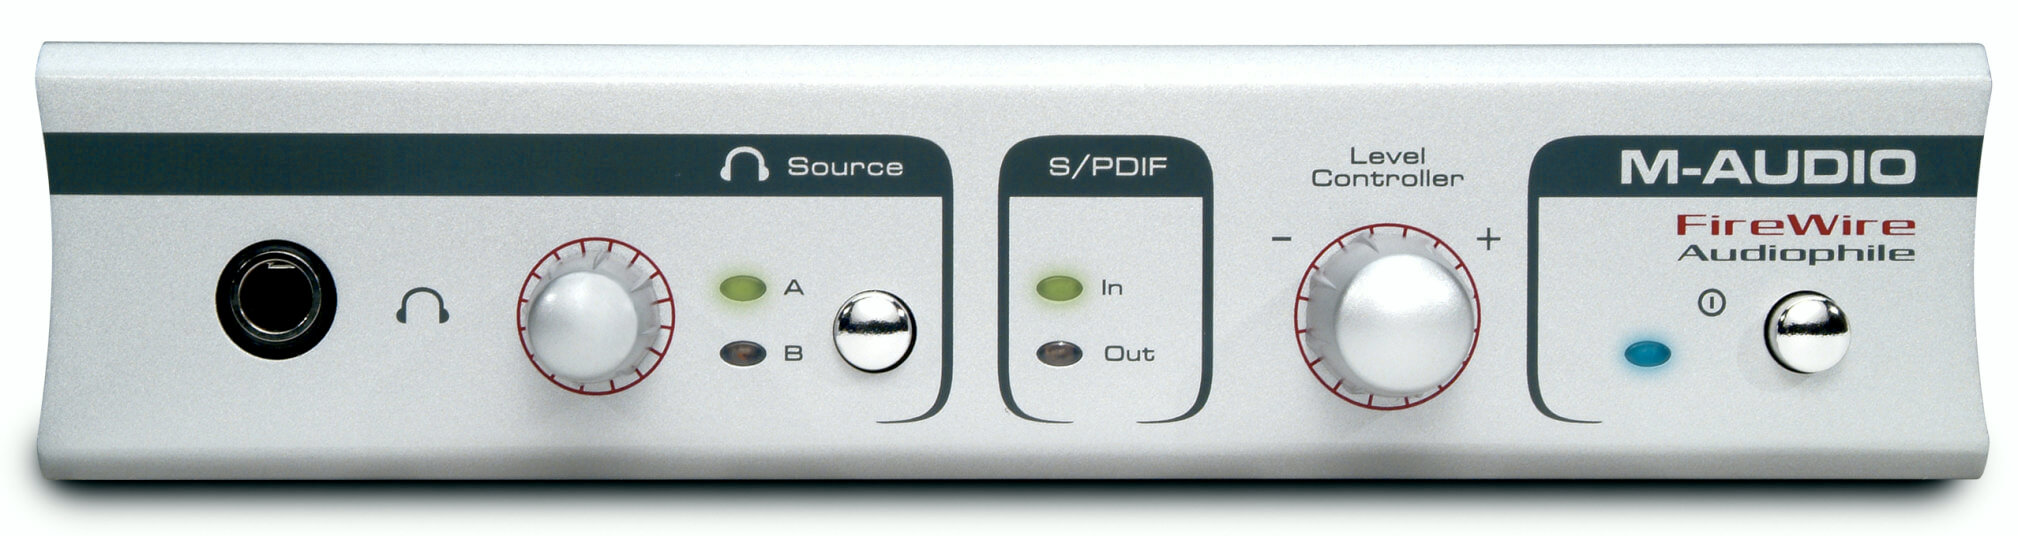 FireWire_Audiophile_front3-3a8131f70455f1a86448d0600620f6af